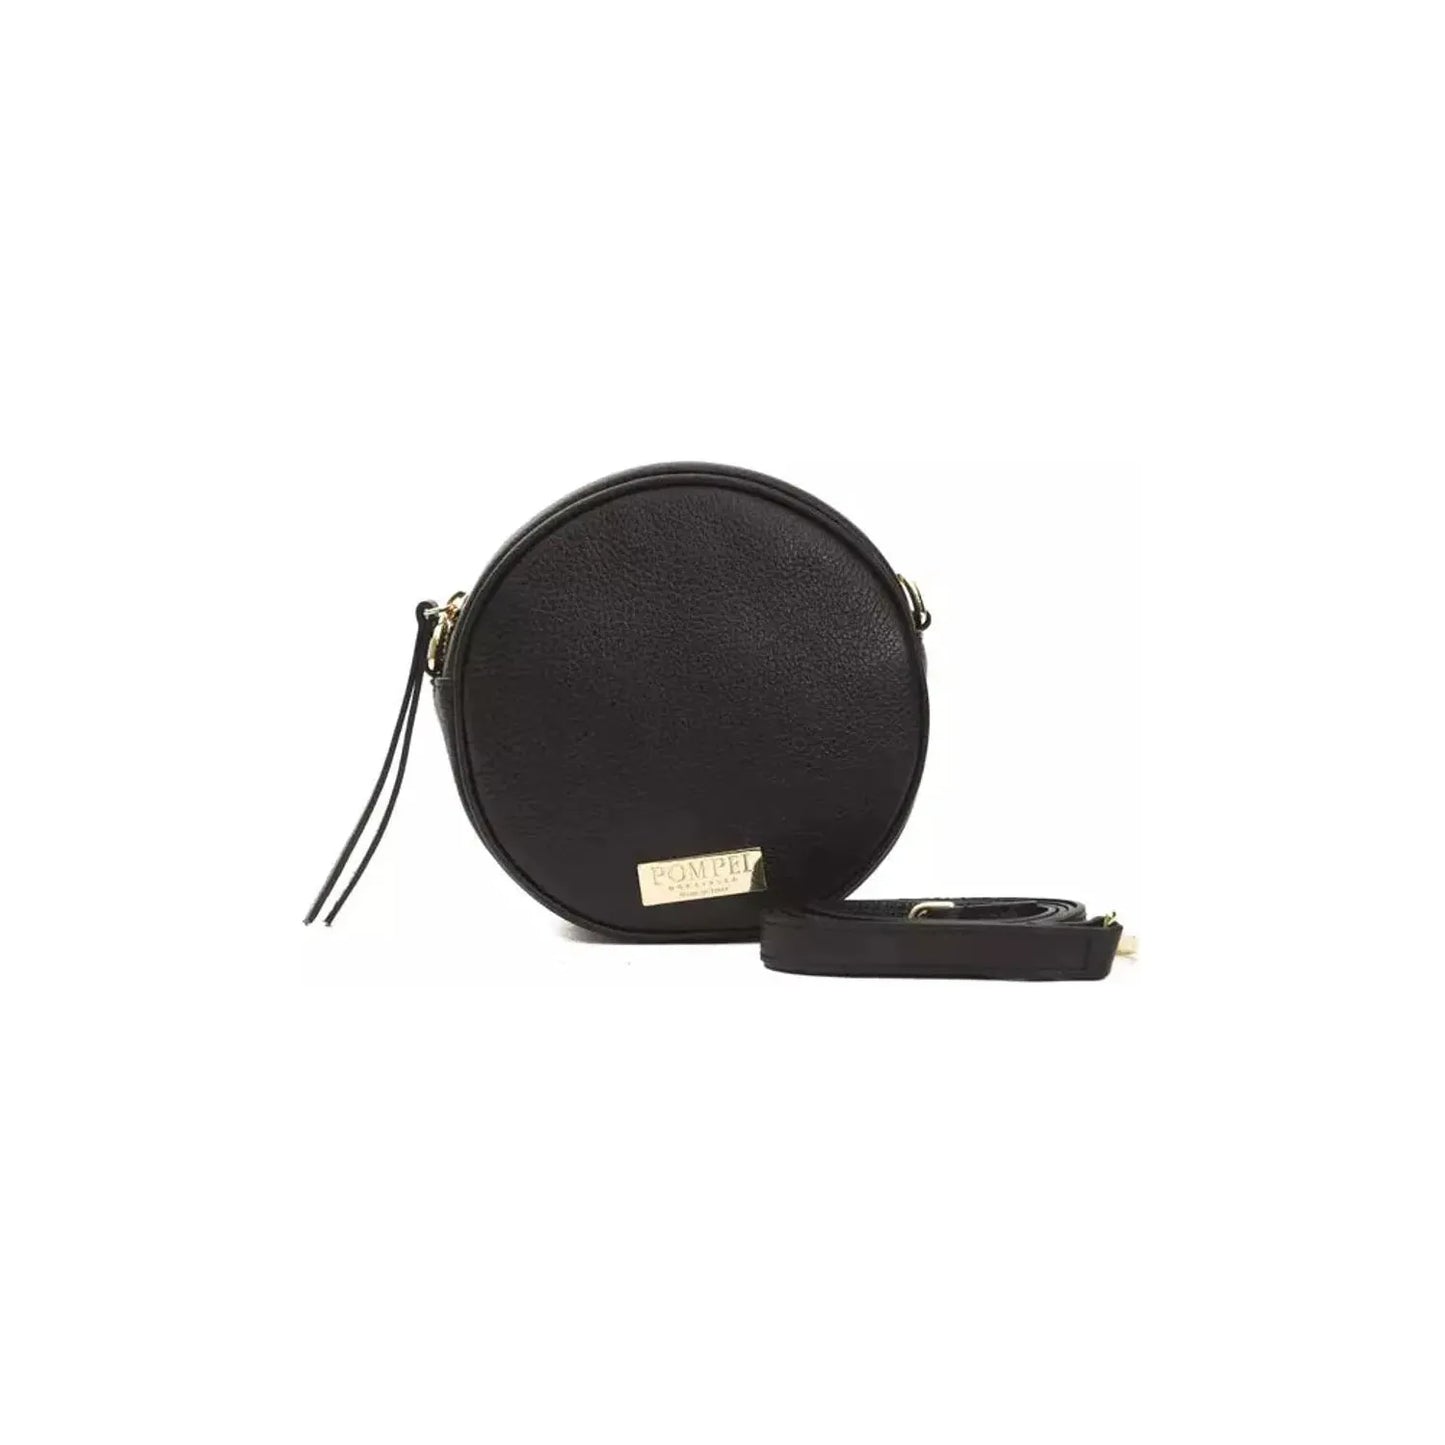 Pompei Donatella Small Oval Leather Crossbody Elegance black-leather-crossbody-bag Crossbody Bag stock_product_image_5813_1132623226-30-2e10599a-af2.webp